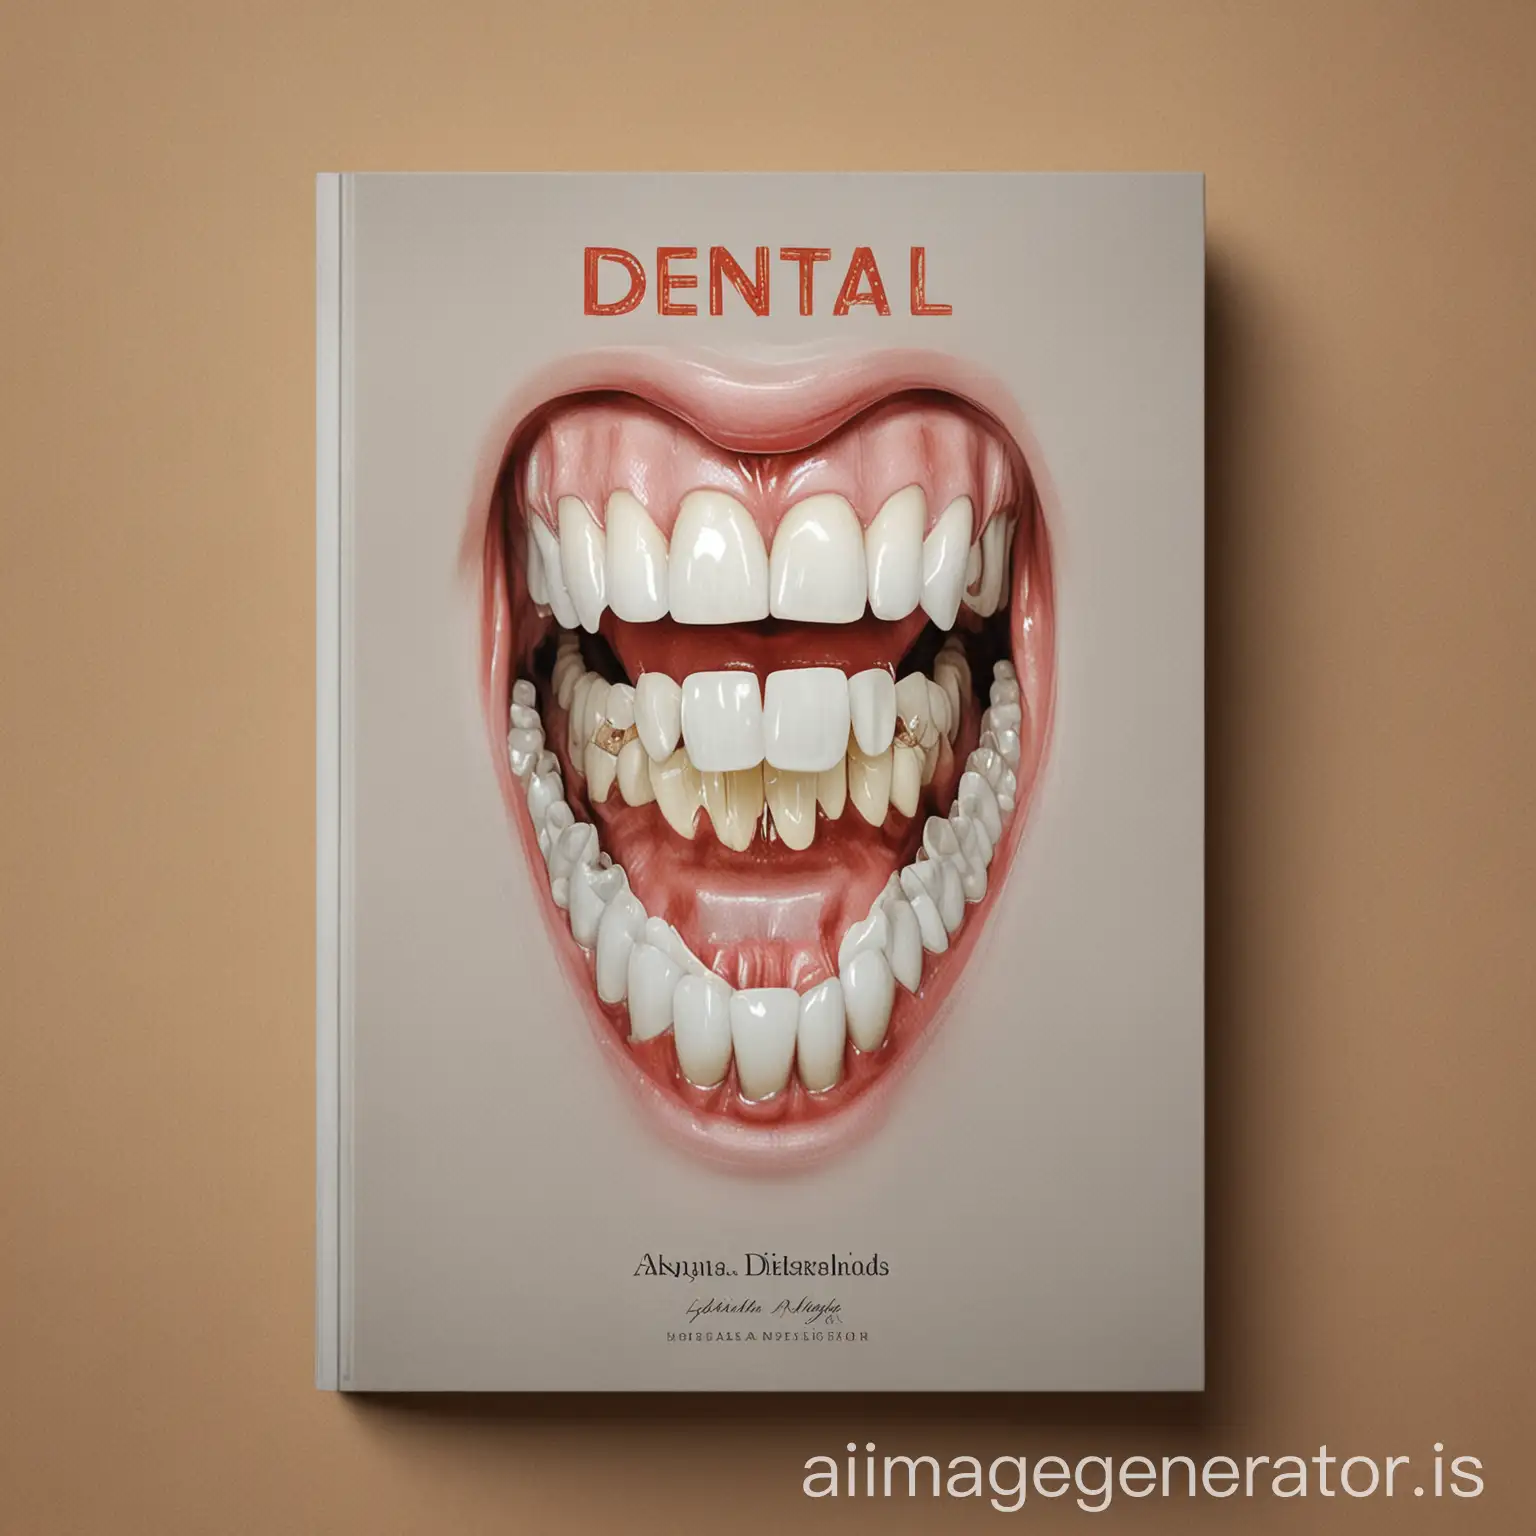 please make book cover "dental background poster"